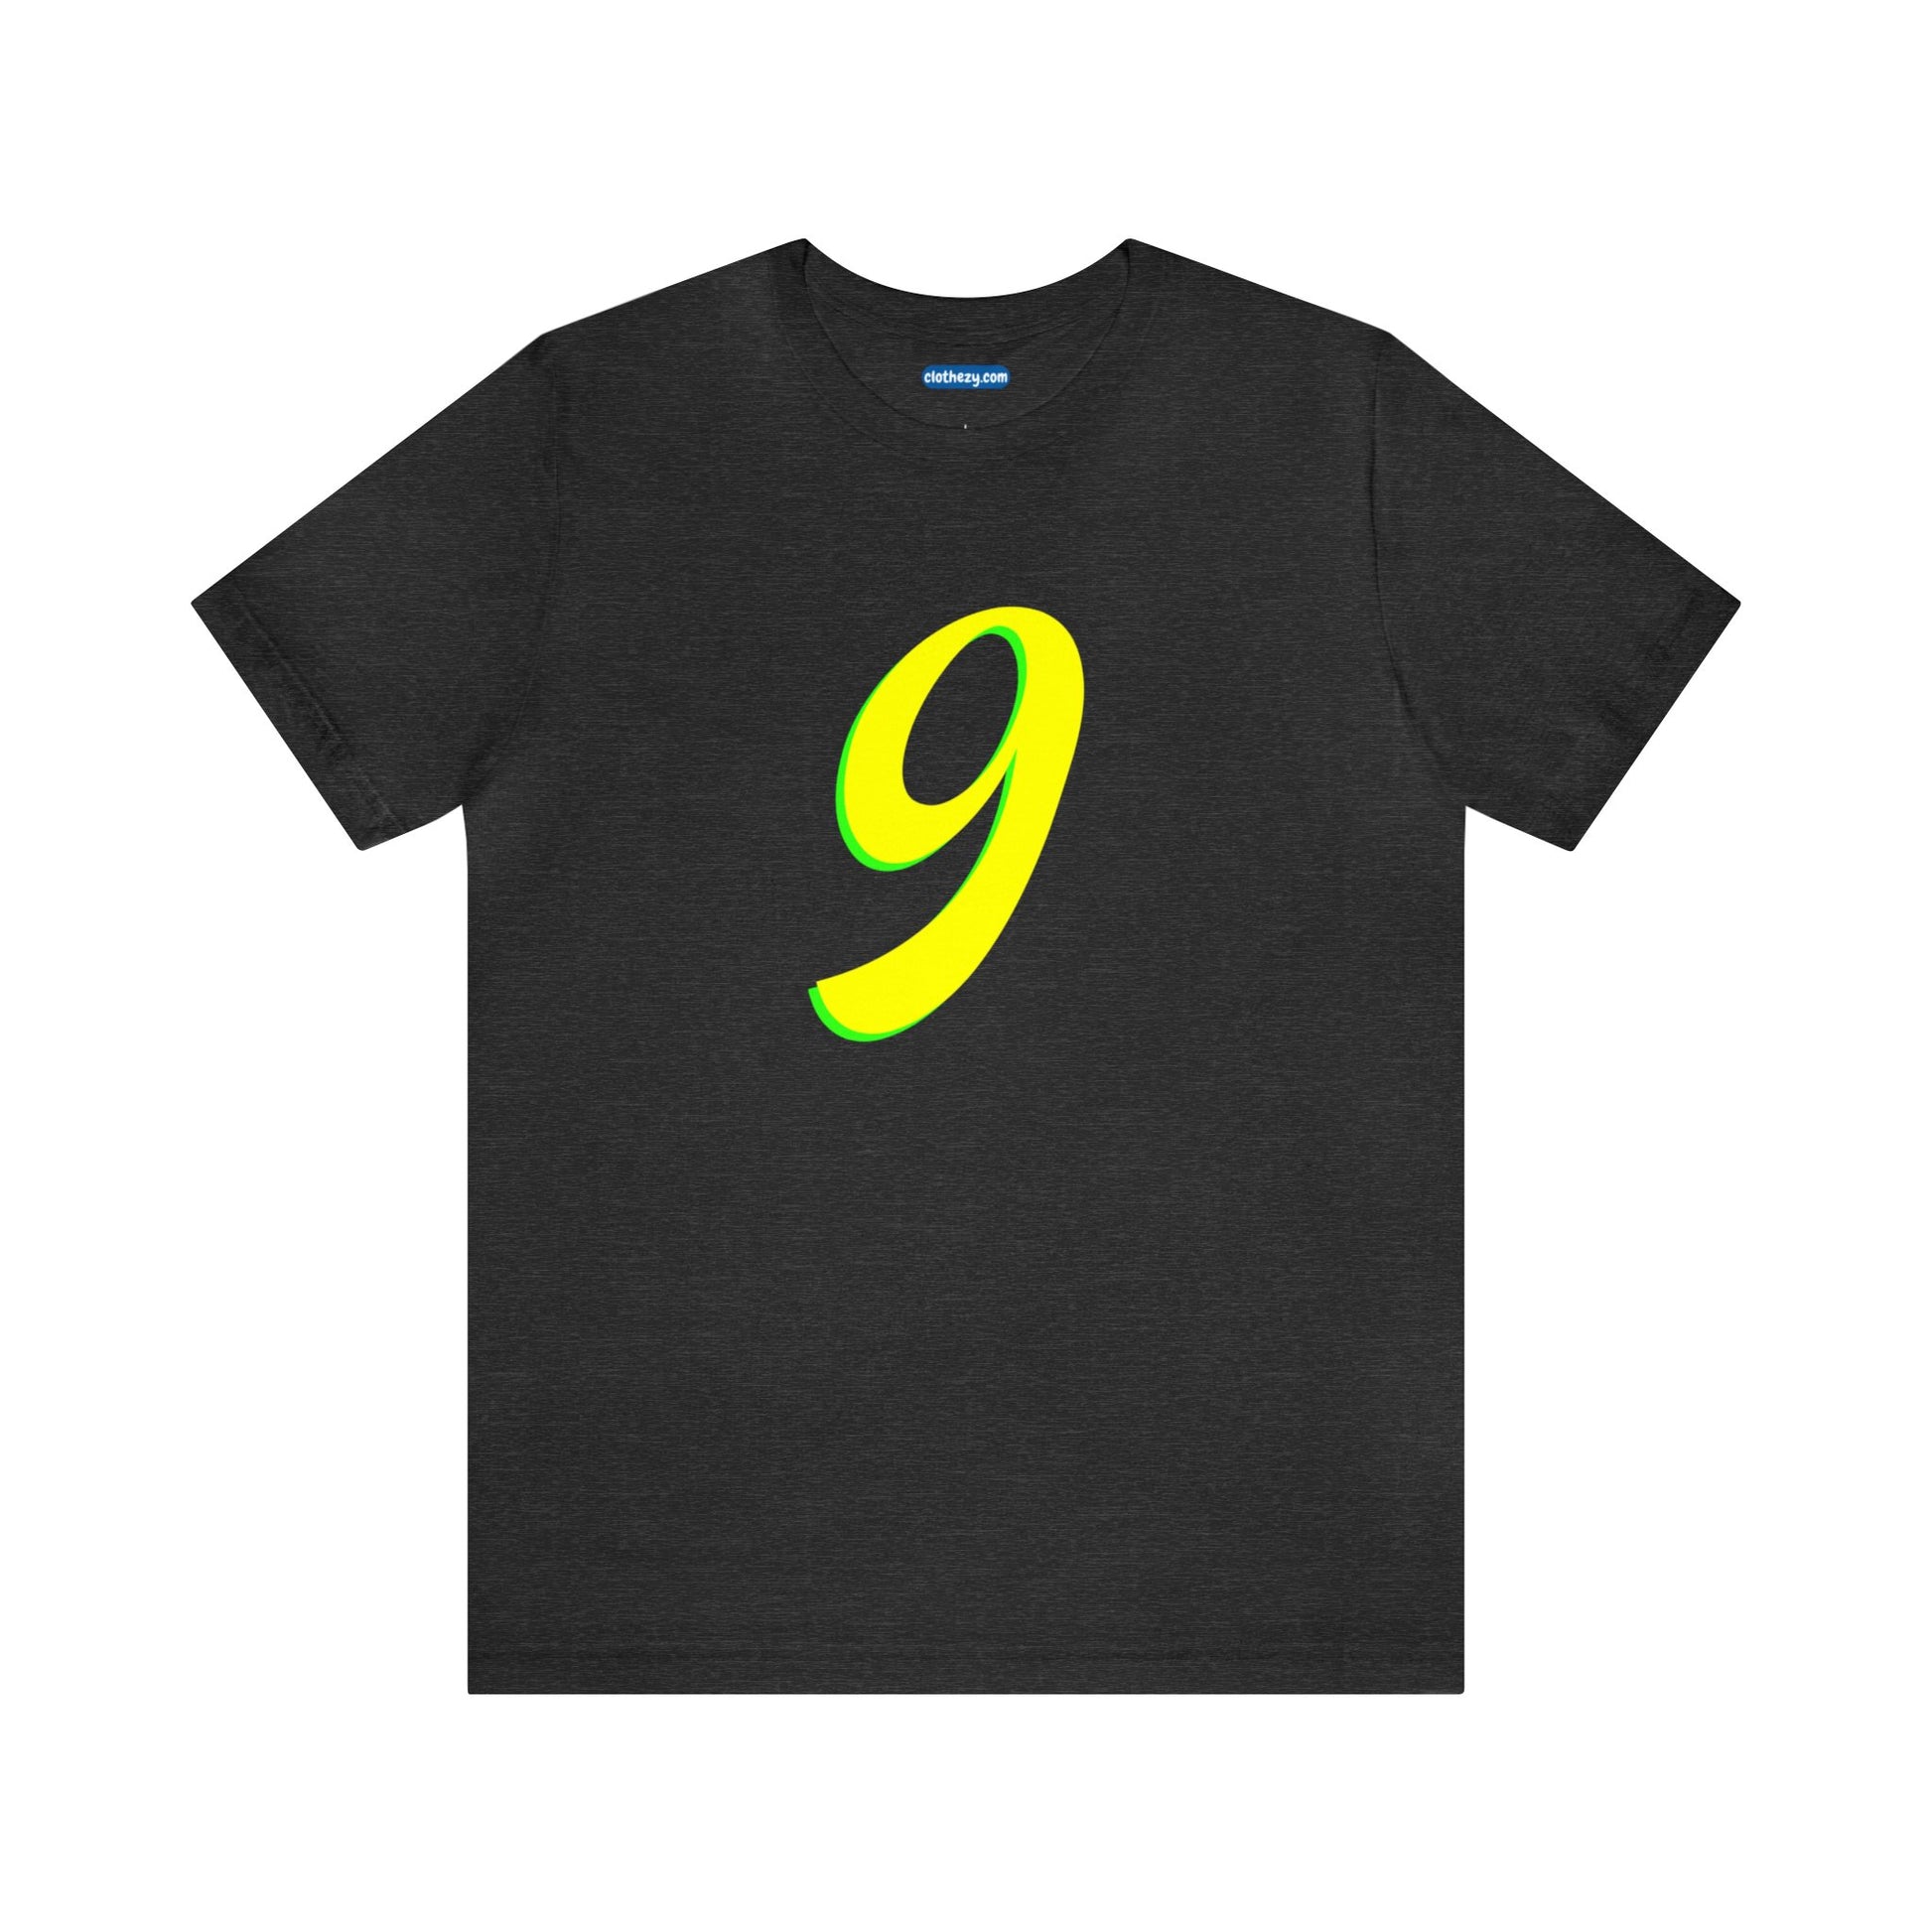 Number 9 Design - Soft Cotton Tee for birthdays and celebrations, Gift for friends and family, Multiple Options by clothezy.com in Gold Size Small - Buy Now